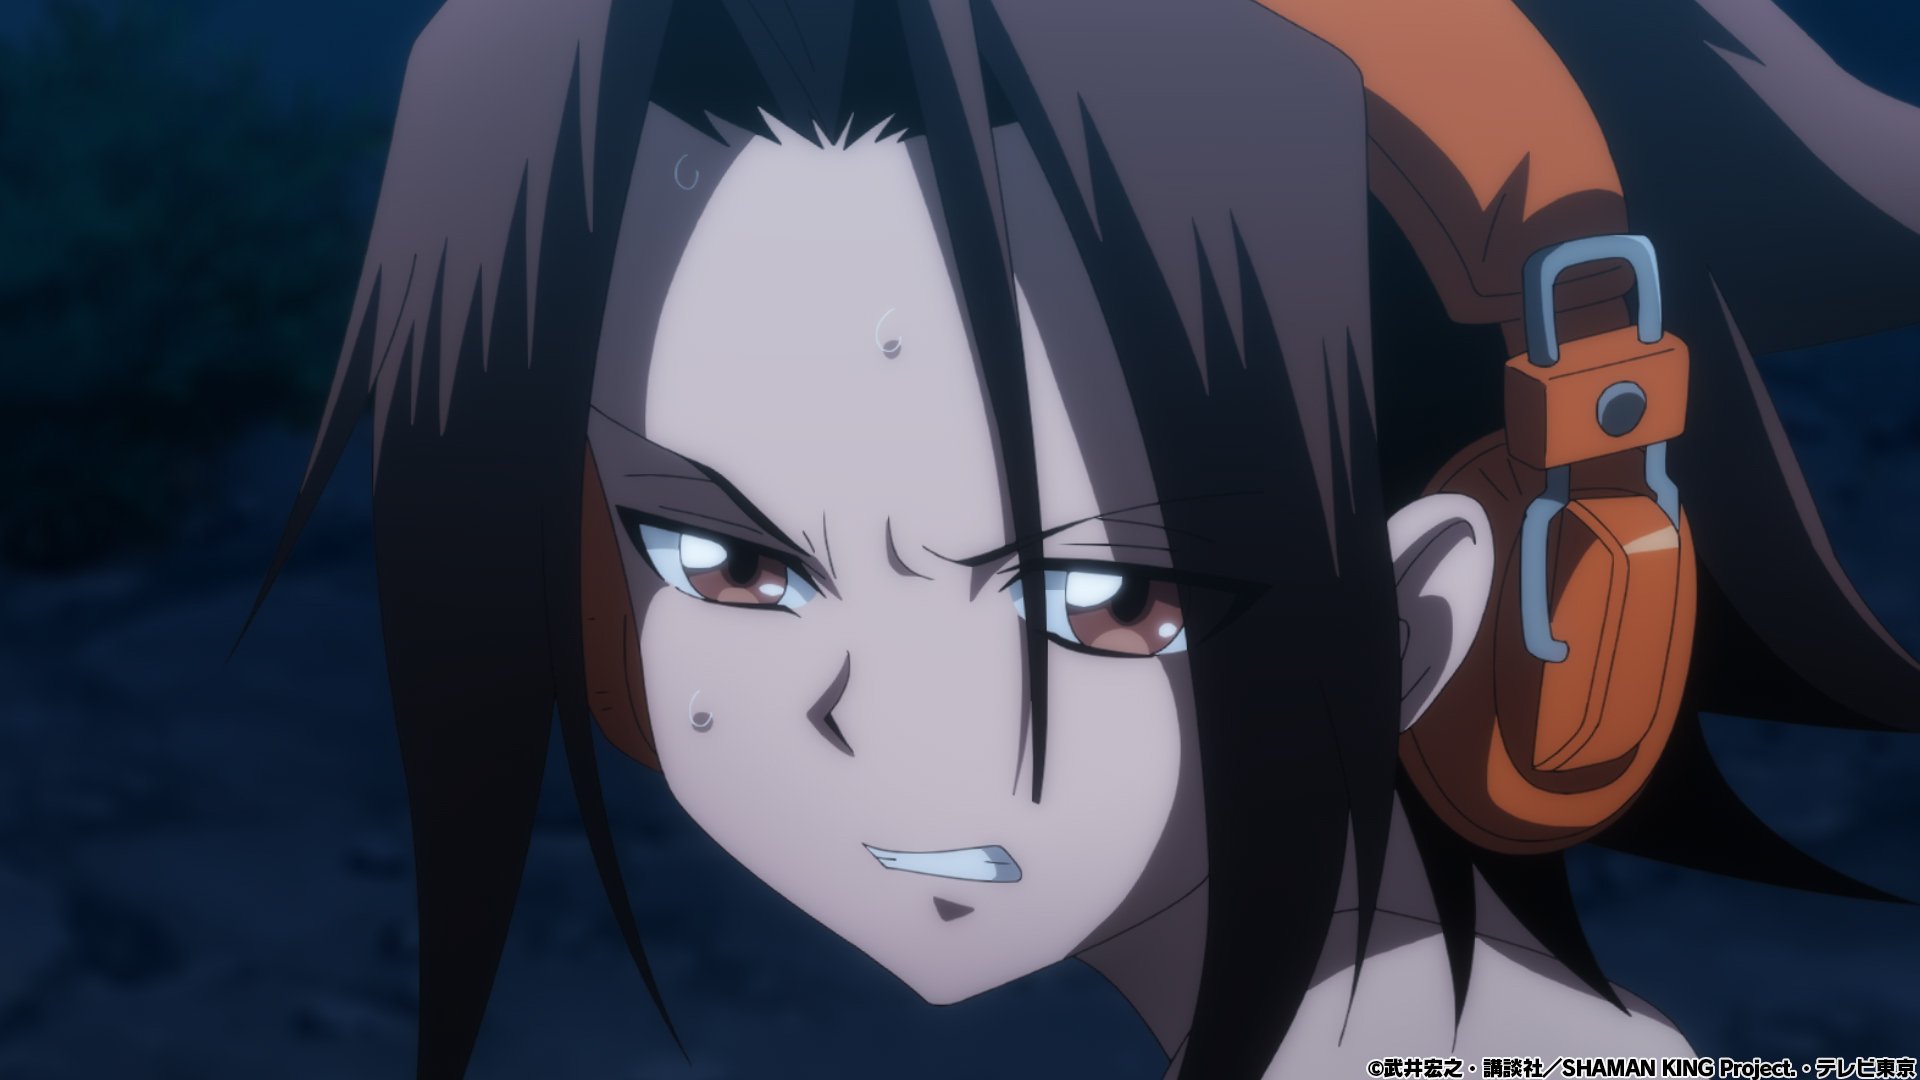 Yoh rises up to break the chain of grief!! TV anime SHAMAN KING episode 36 synopsis and scene preview release - れポたま！